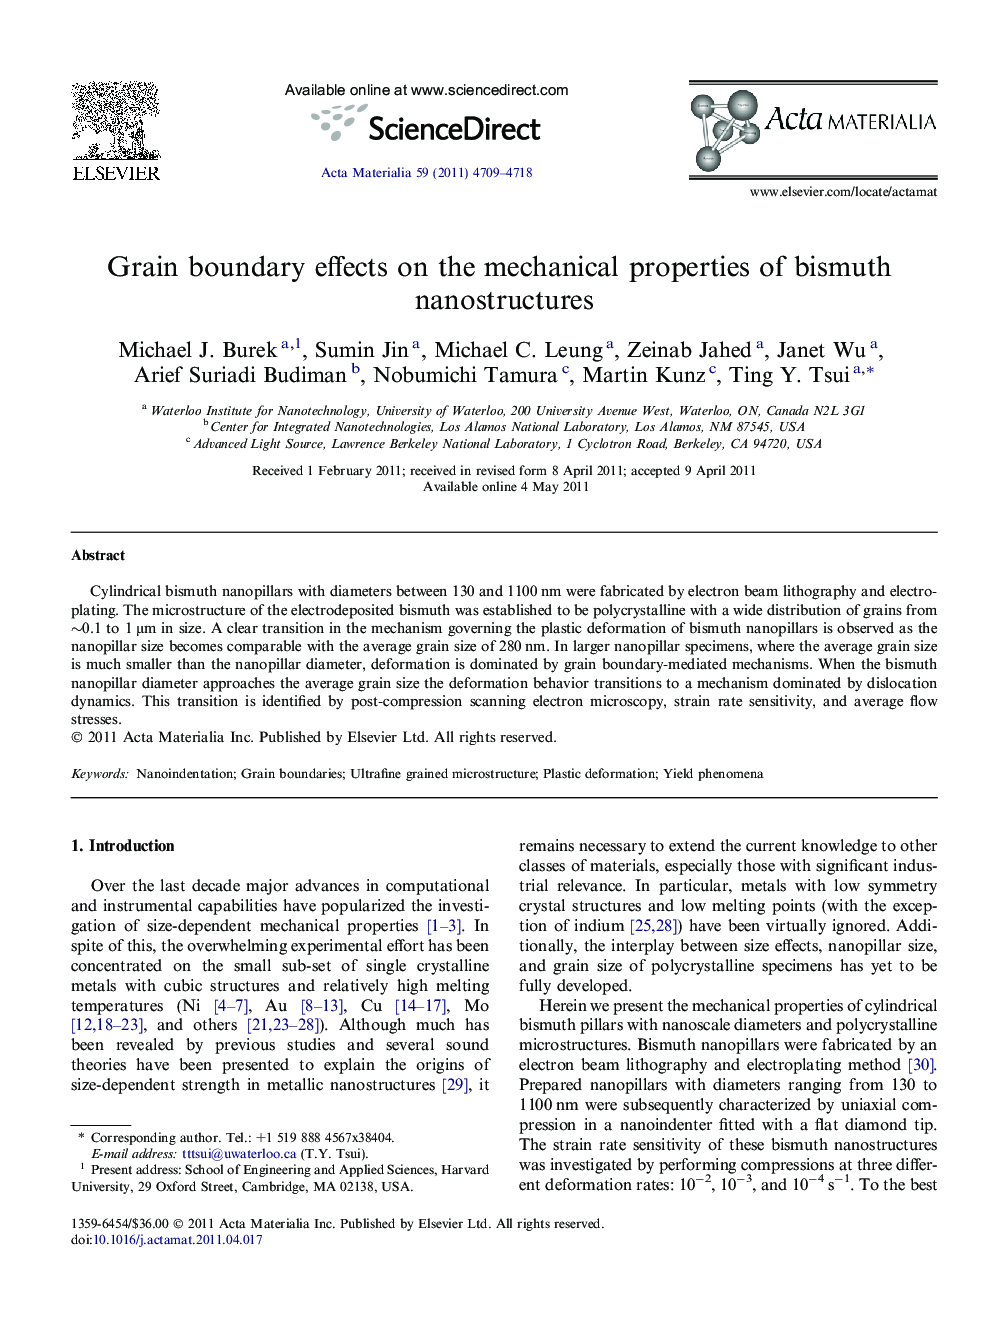 Grain boundary effects on the mechanical properties of bismuth nanostructures